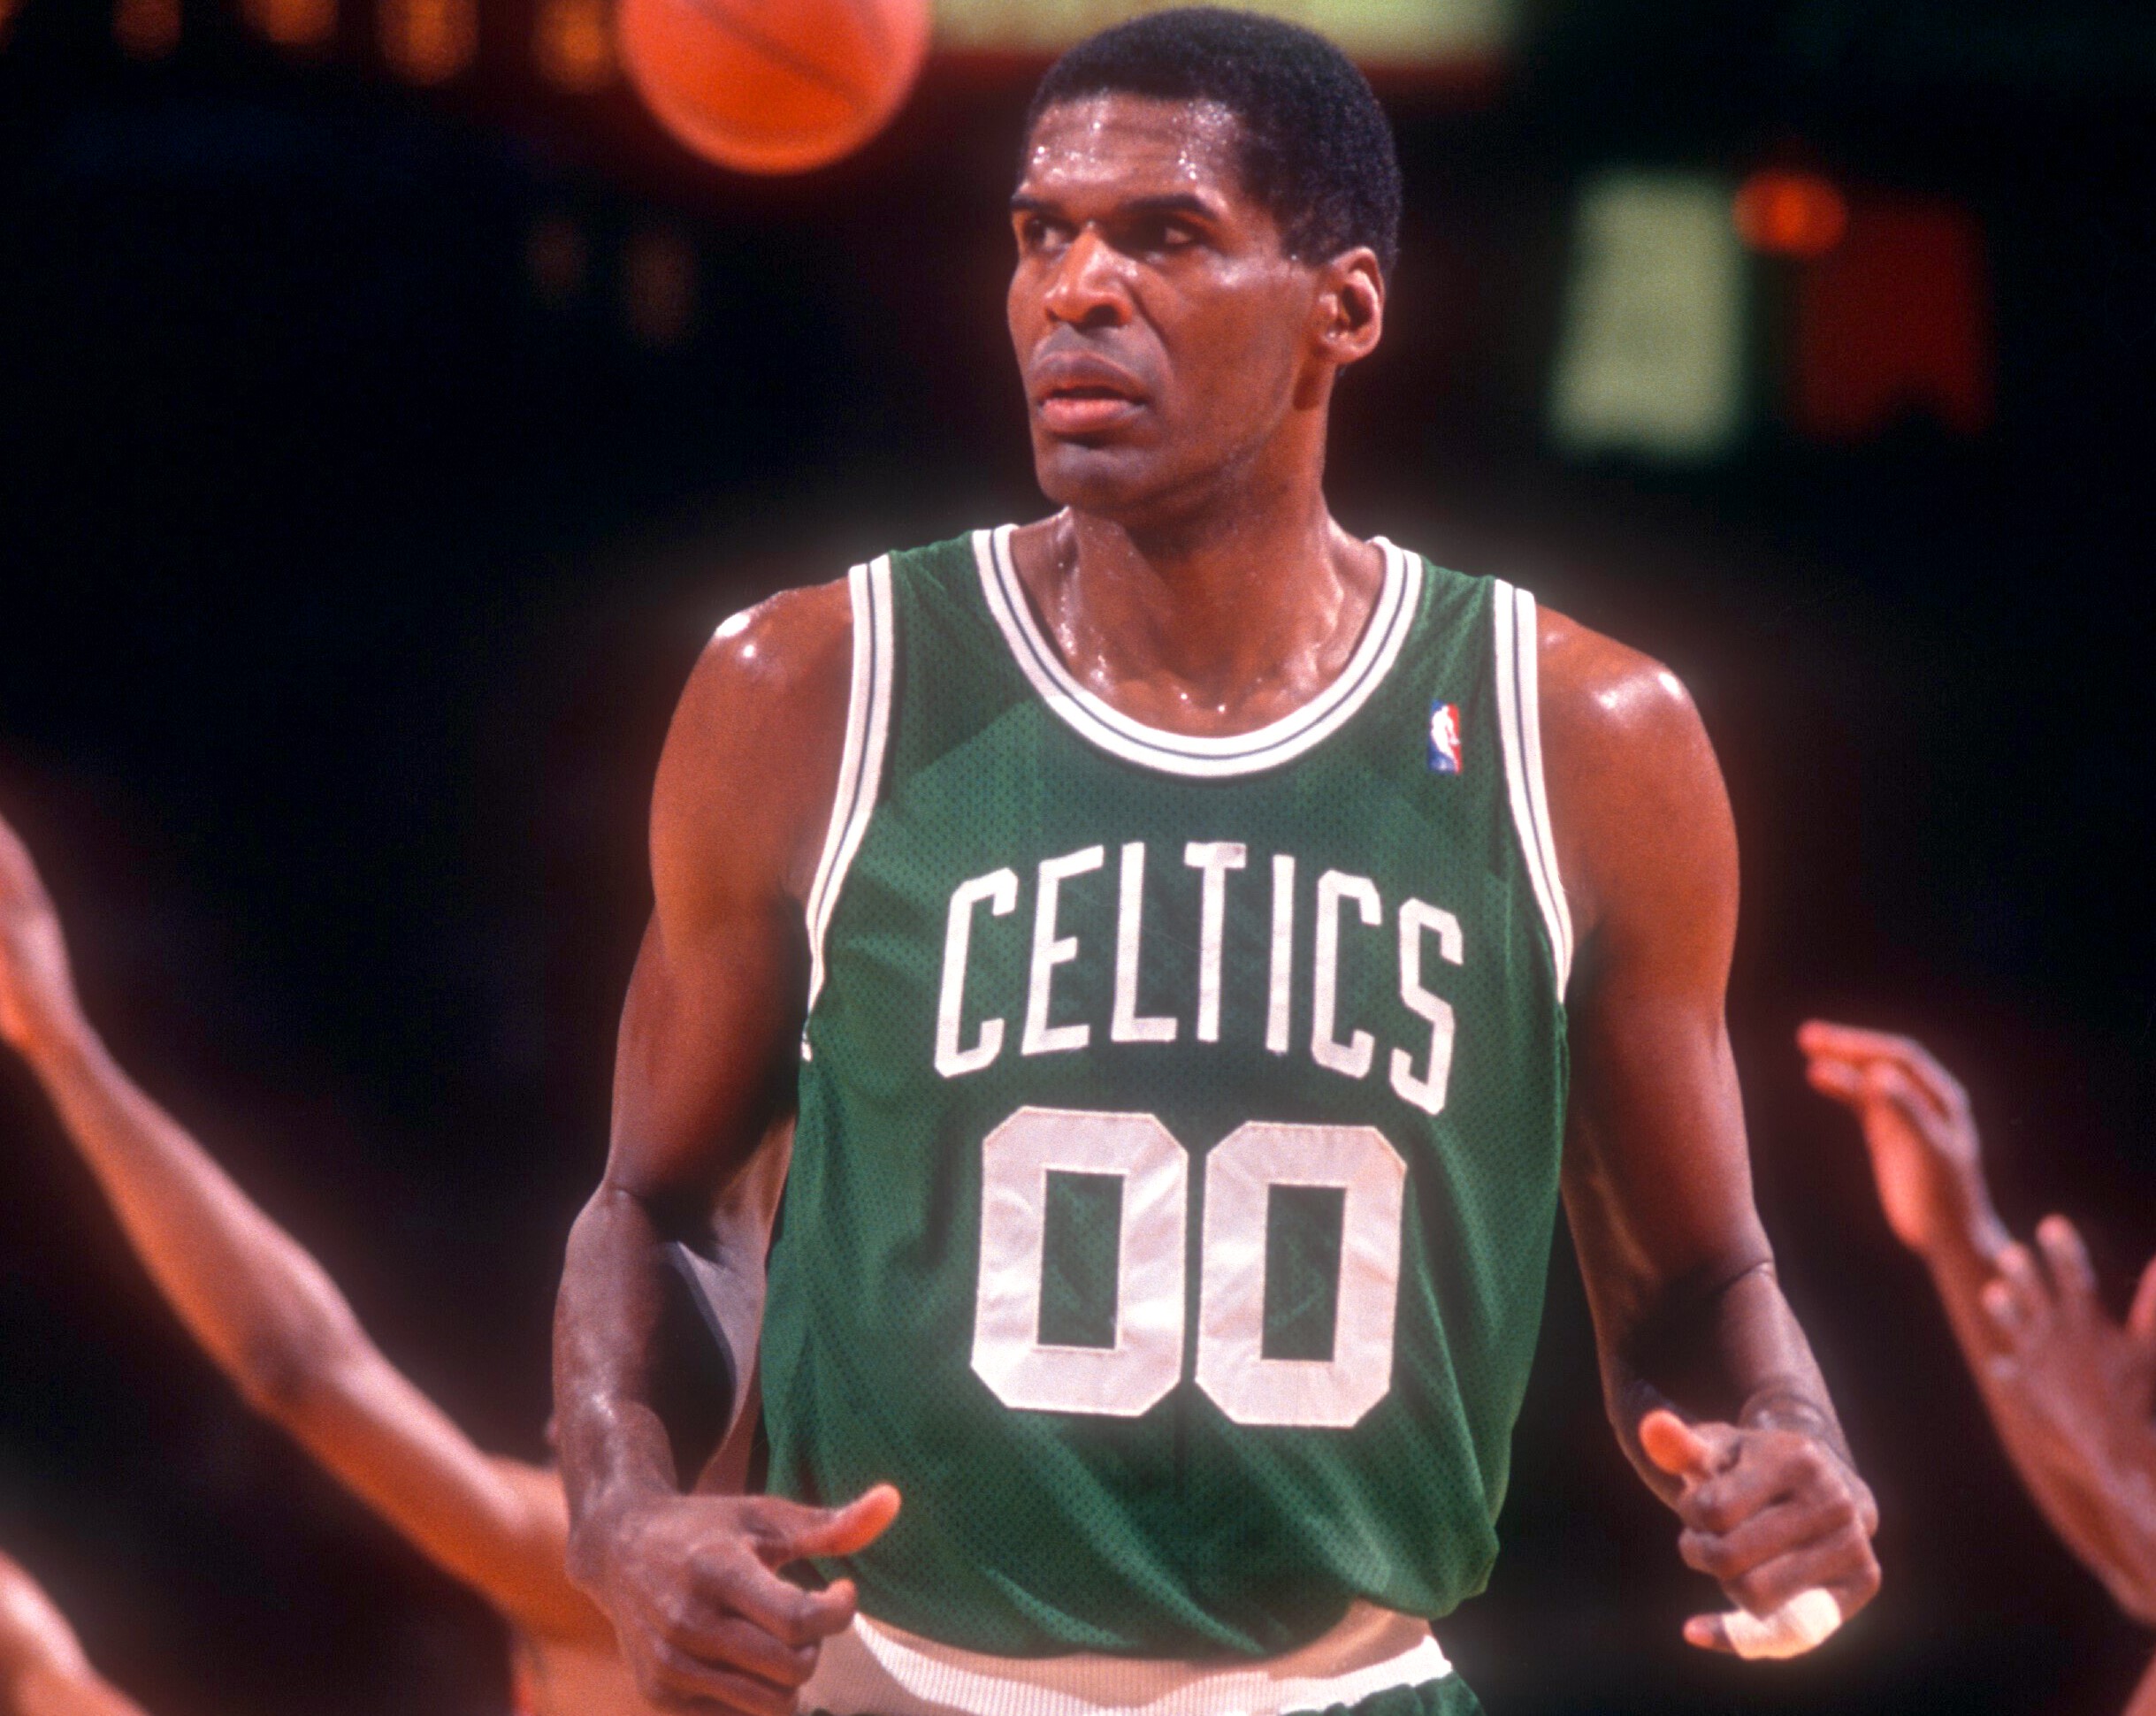 Robert Parish of the Boston Celtics stands on the court during an NBA game against the Philadelphia 76ers.